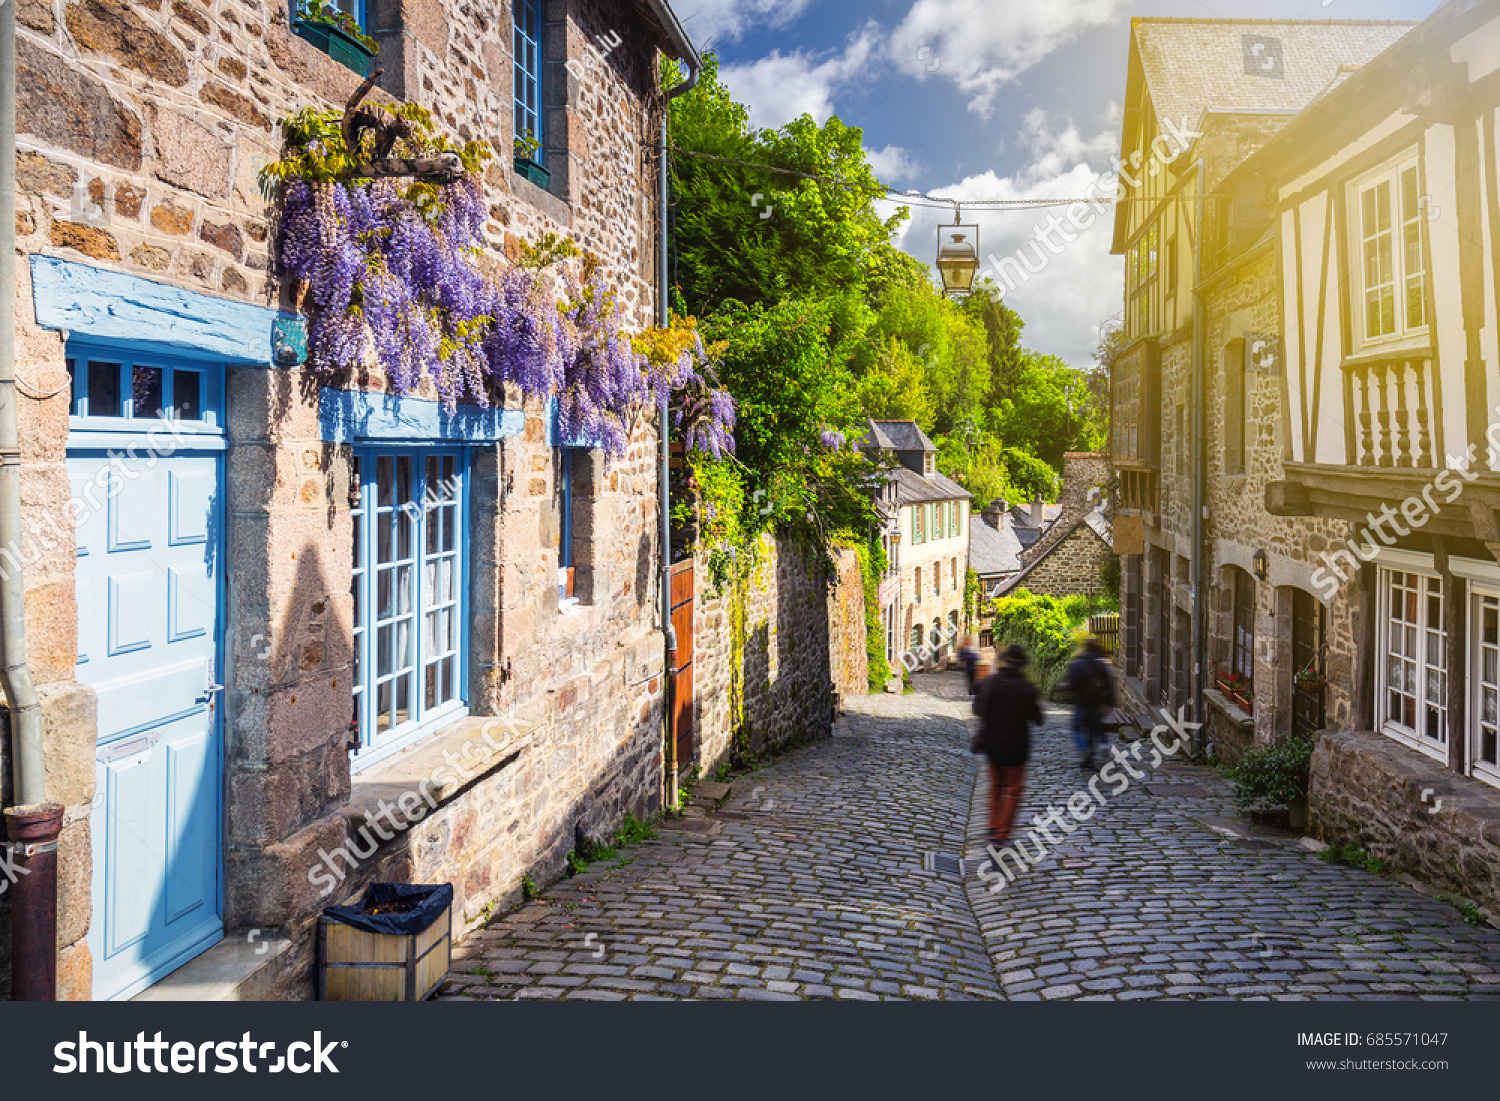 Beautiful view of scenic narrow alley with historic traditional houses and cobbled street in an old town of Dinan with blue sky and clouds. Brittany (Bretagne), France #685571047